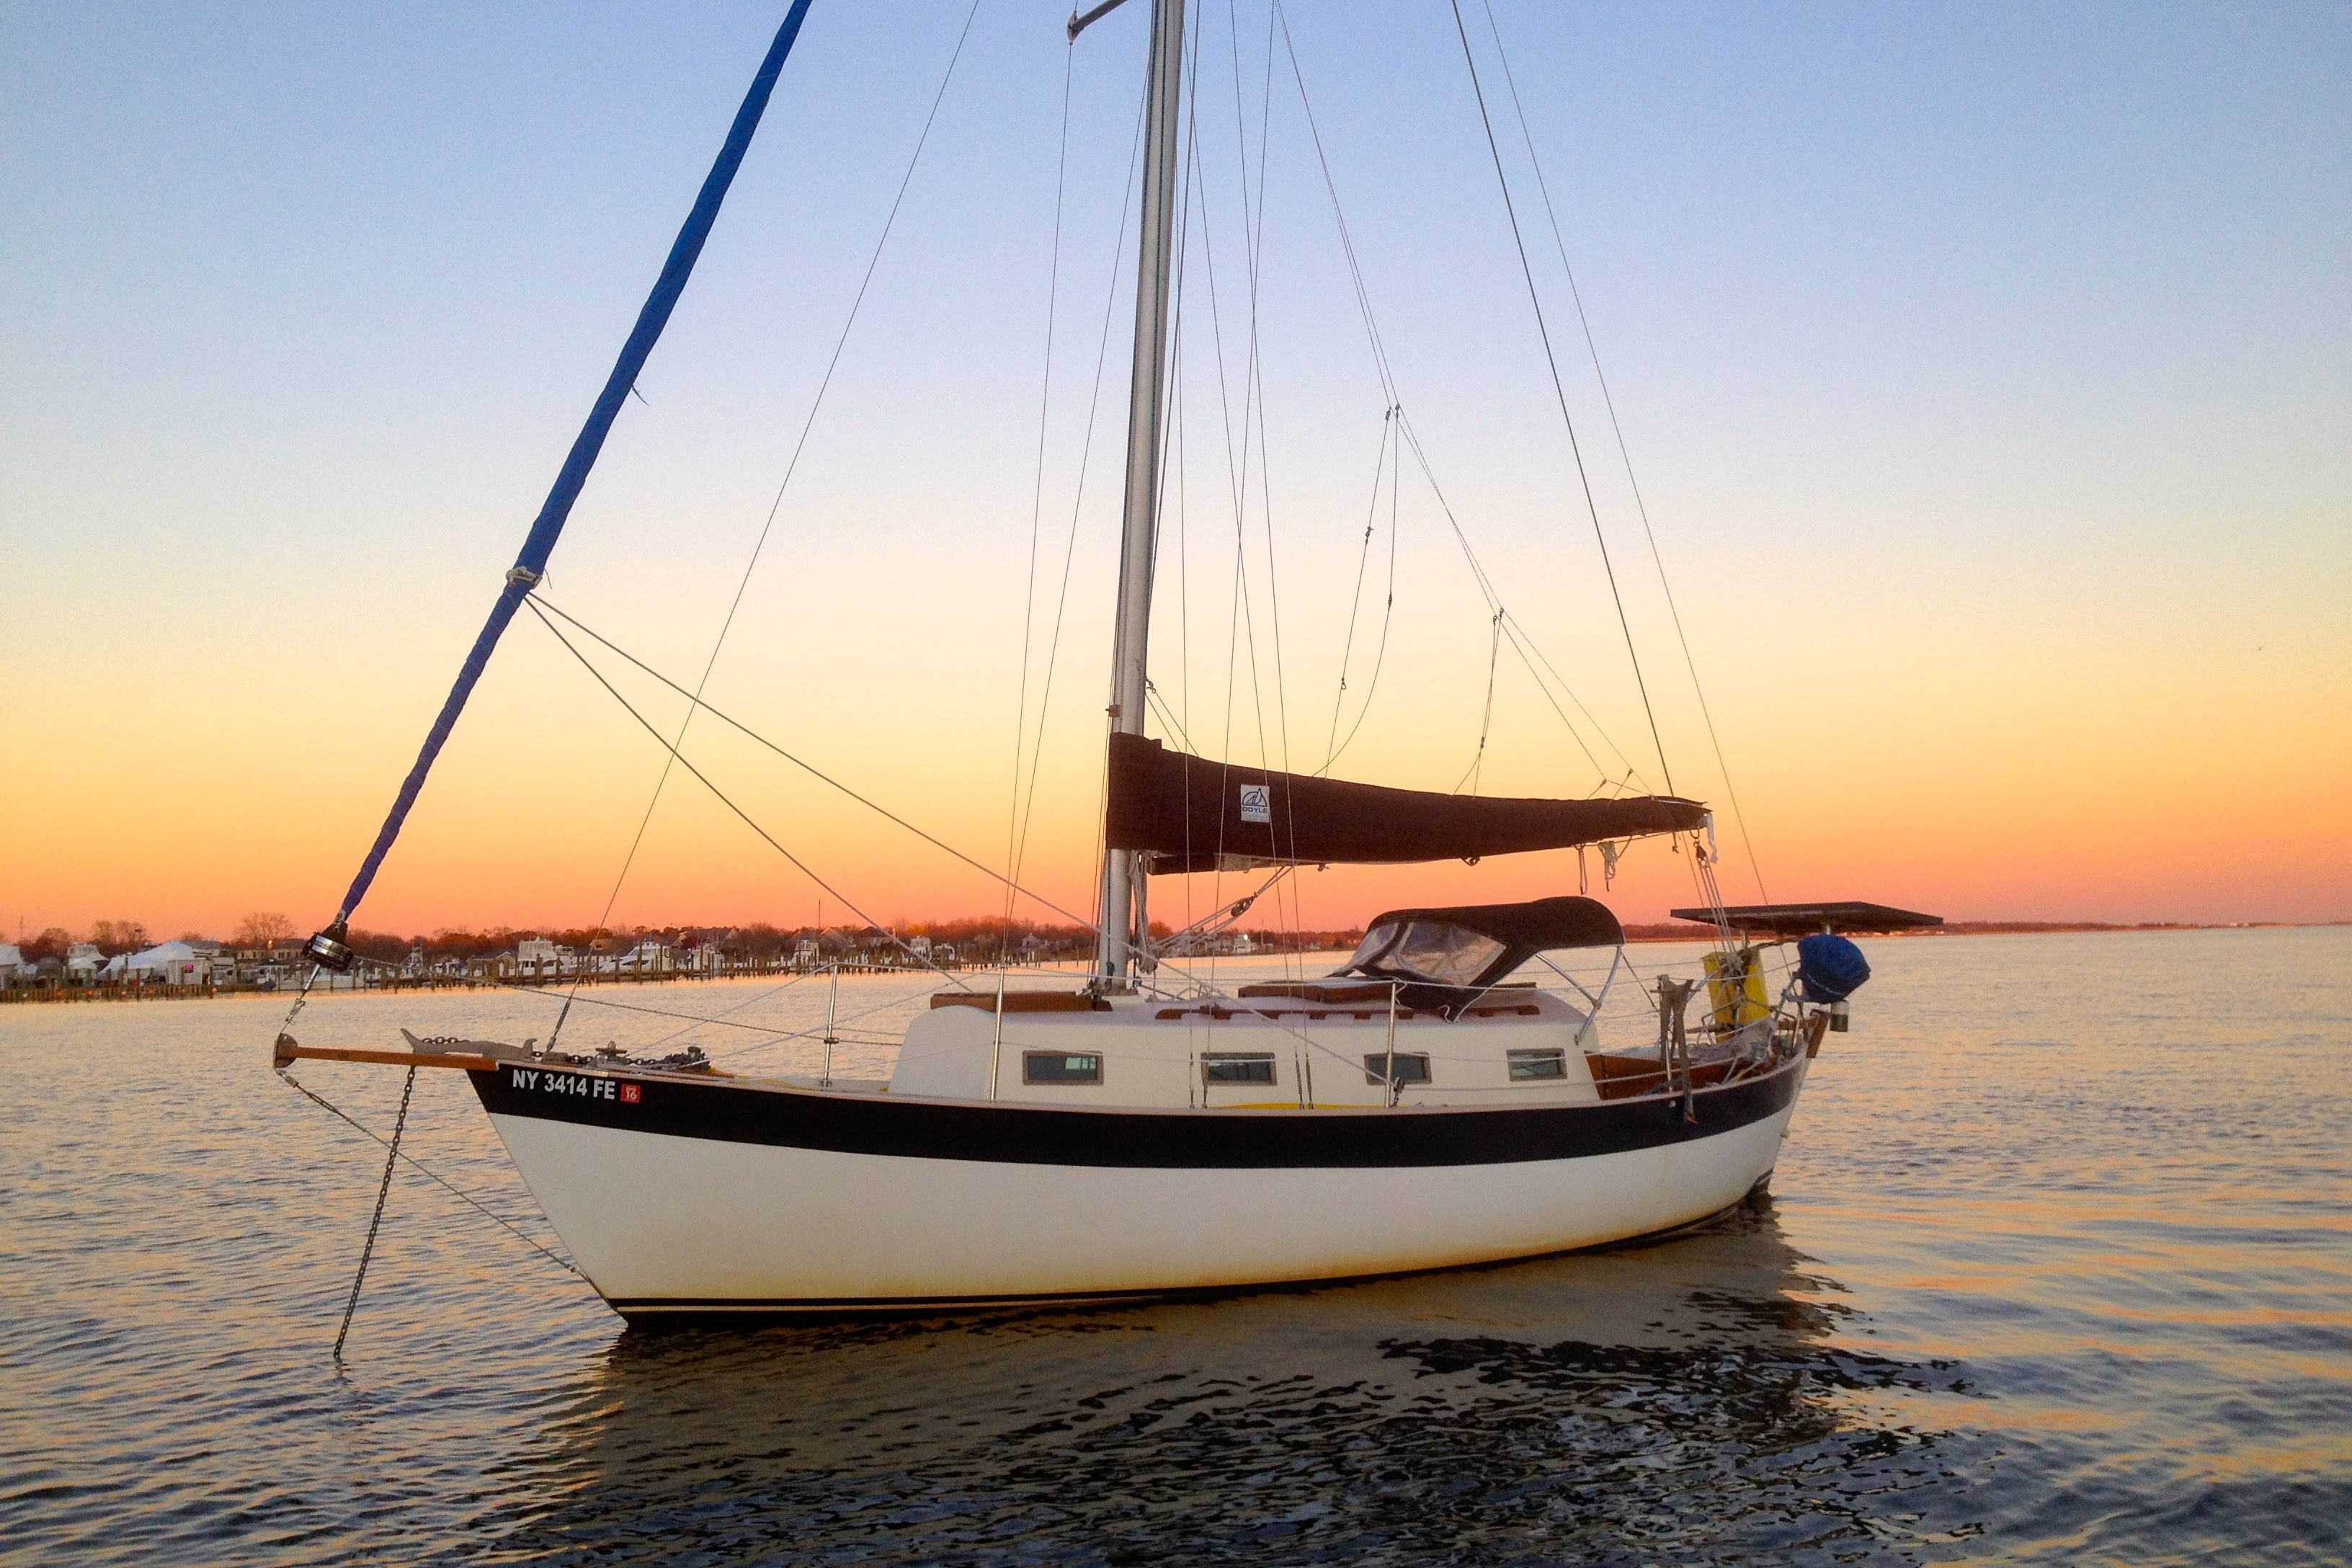 10 reasons why living on a small boat is amazing - tula's